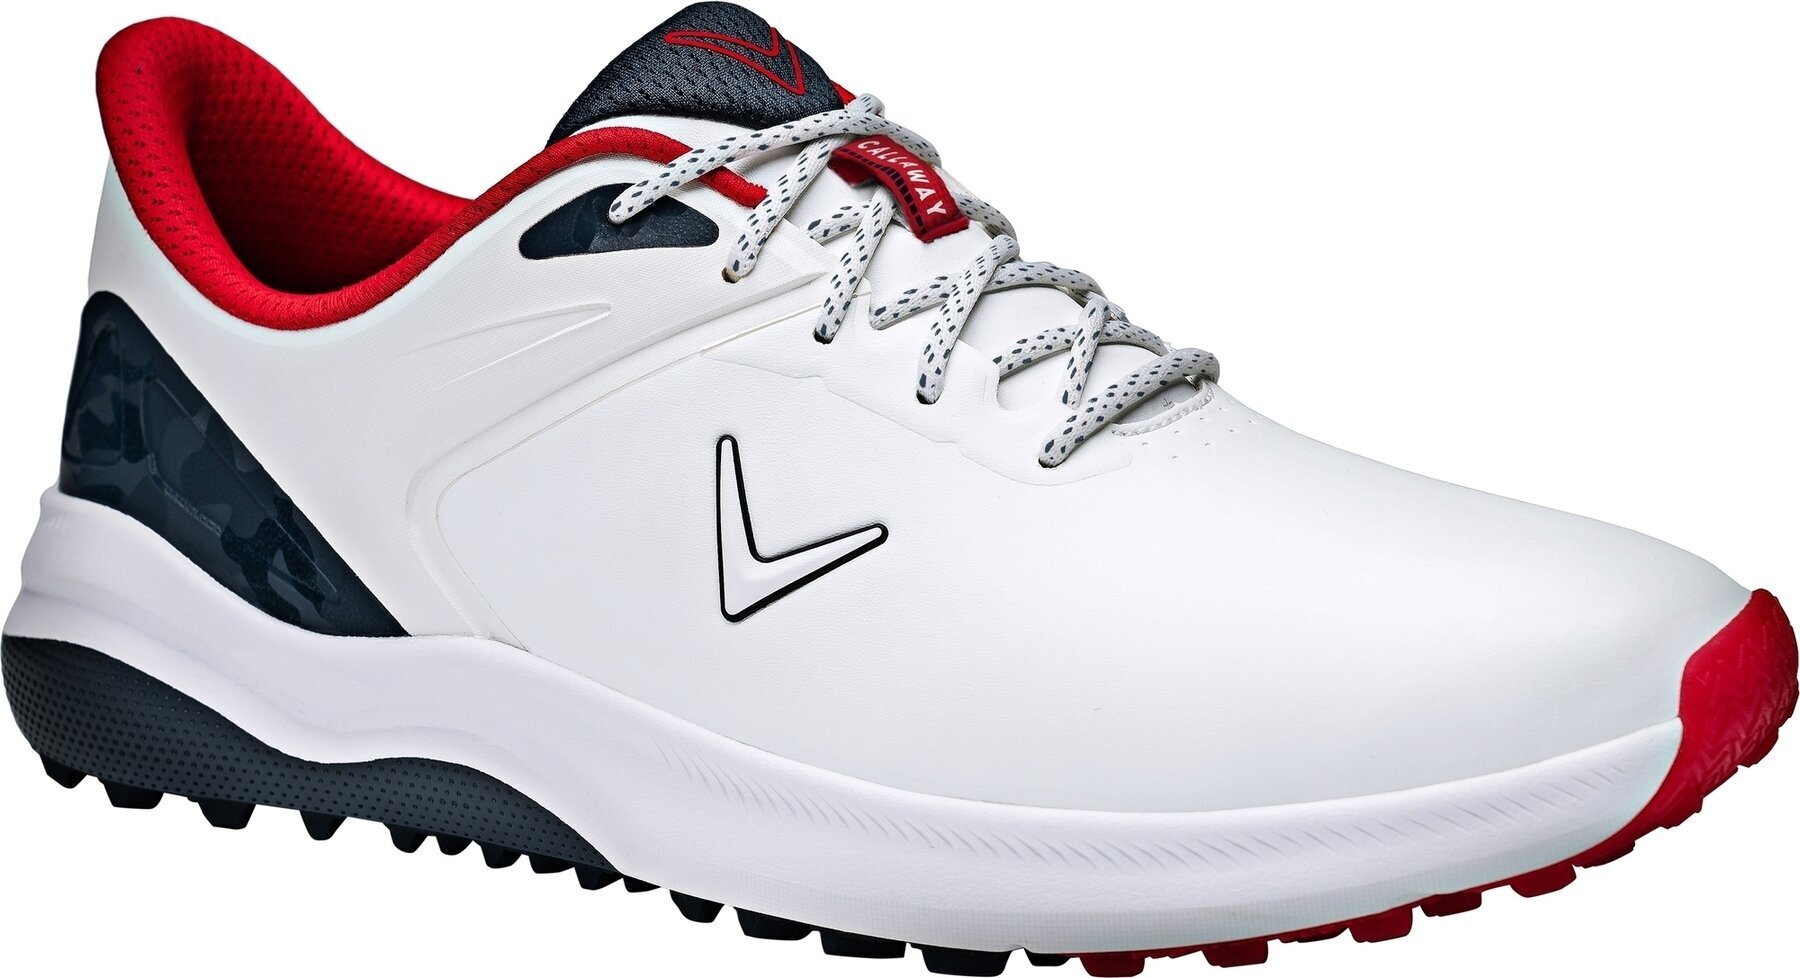 Chaussures de golf pour hommes Callaway Lazer Mens Golf Shoes White/Navy/Red 40,5